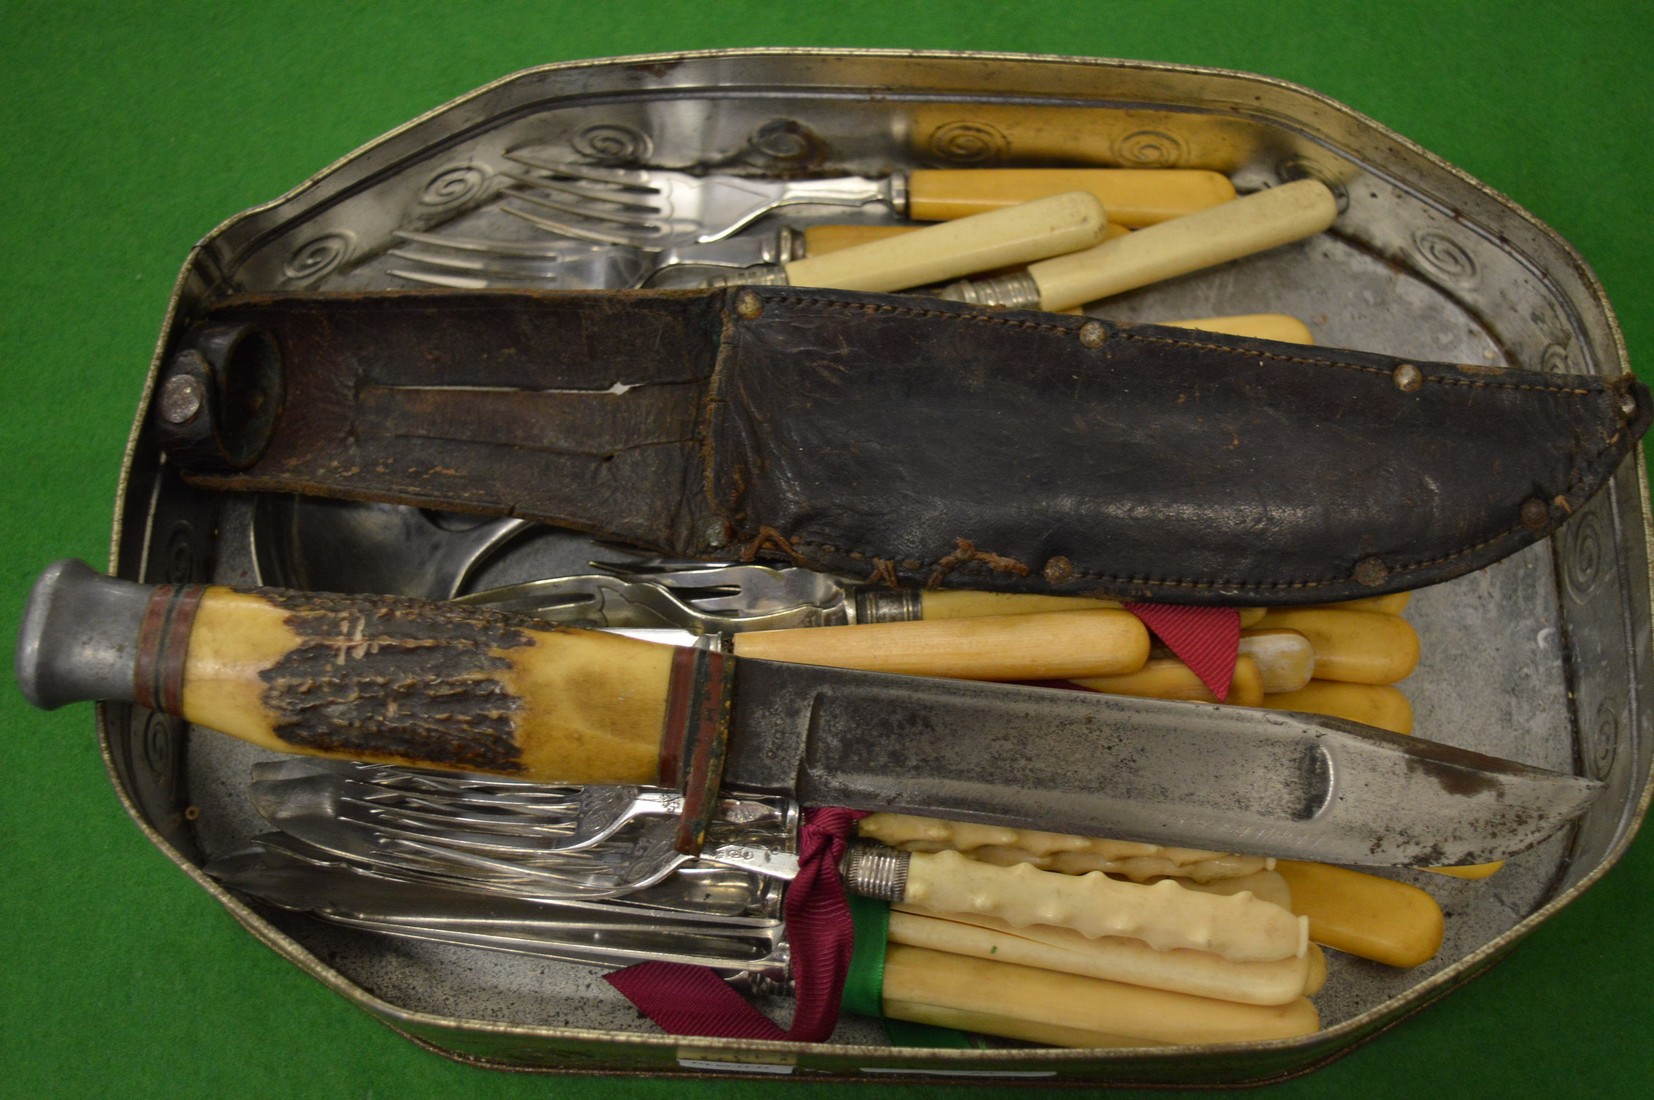 A sheath knife with antler handle and a quantity of flatware.